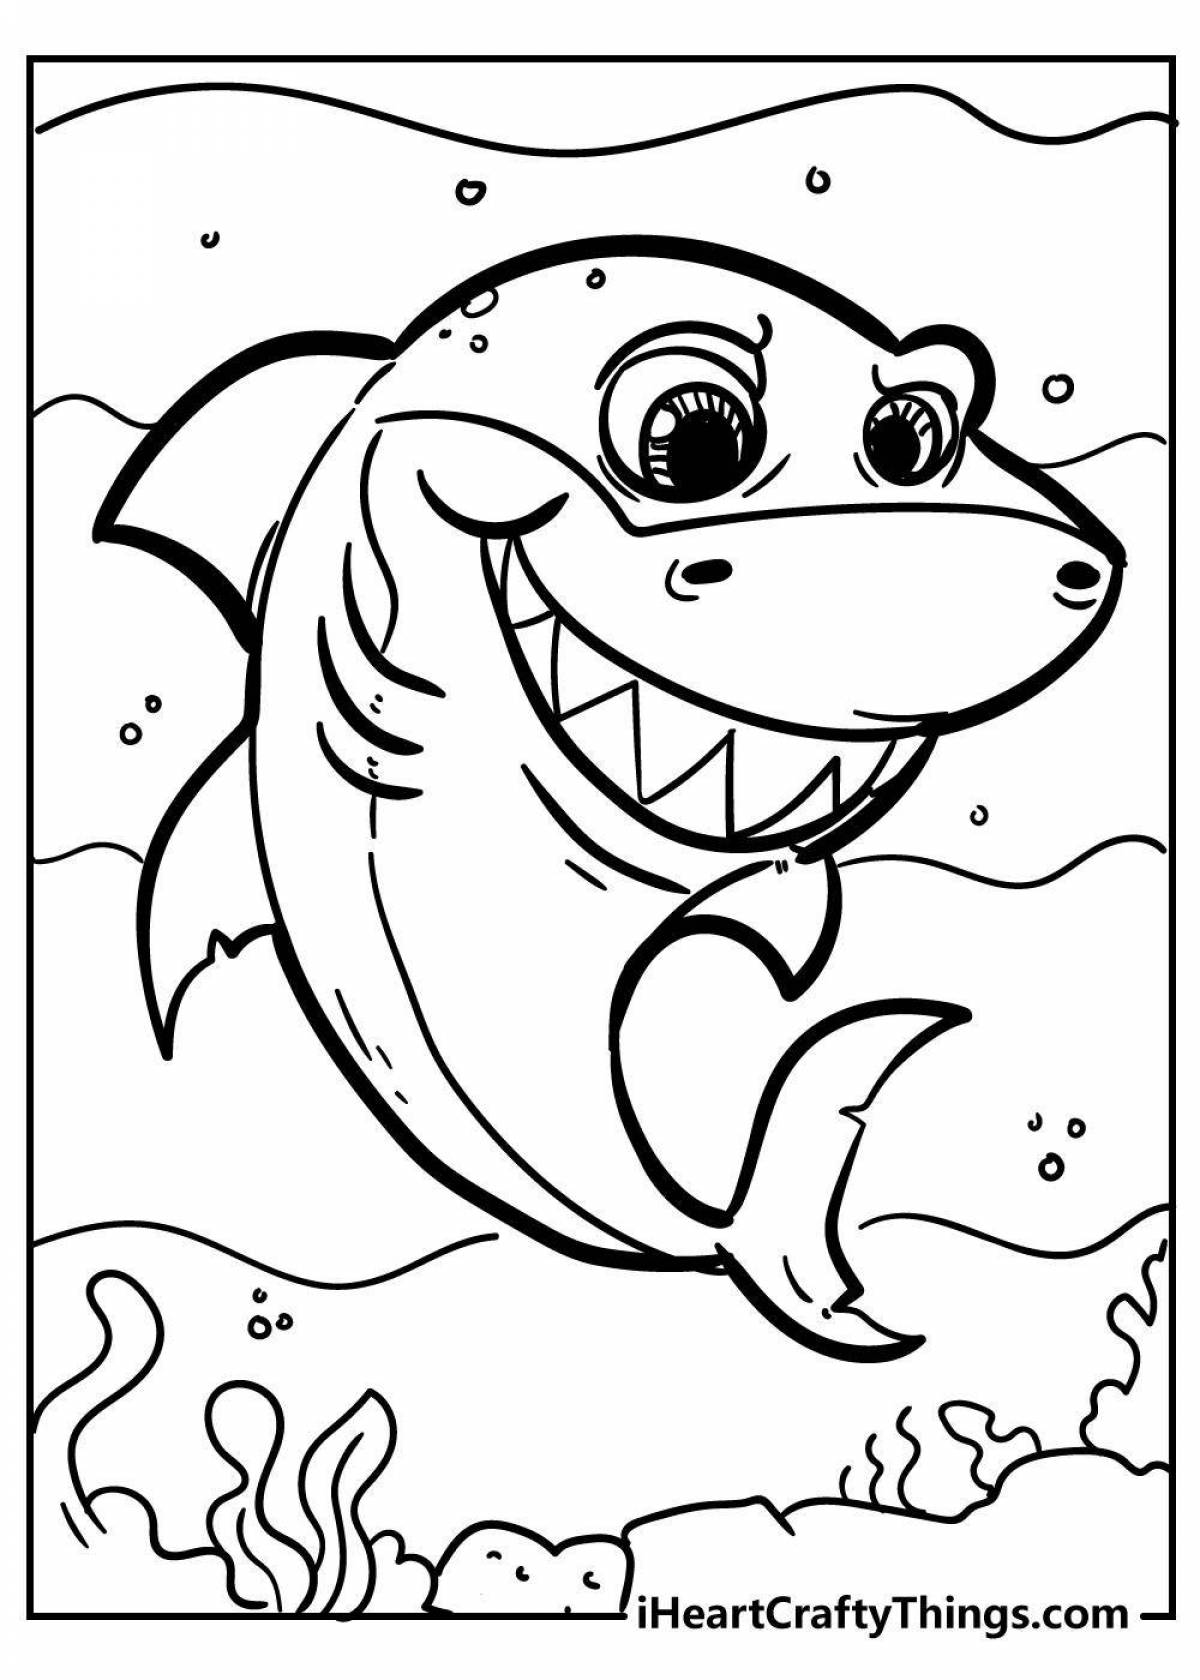 Gorgeous fat shark coloring book